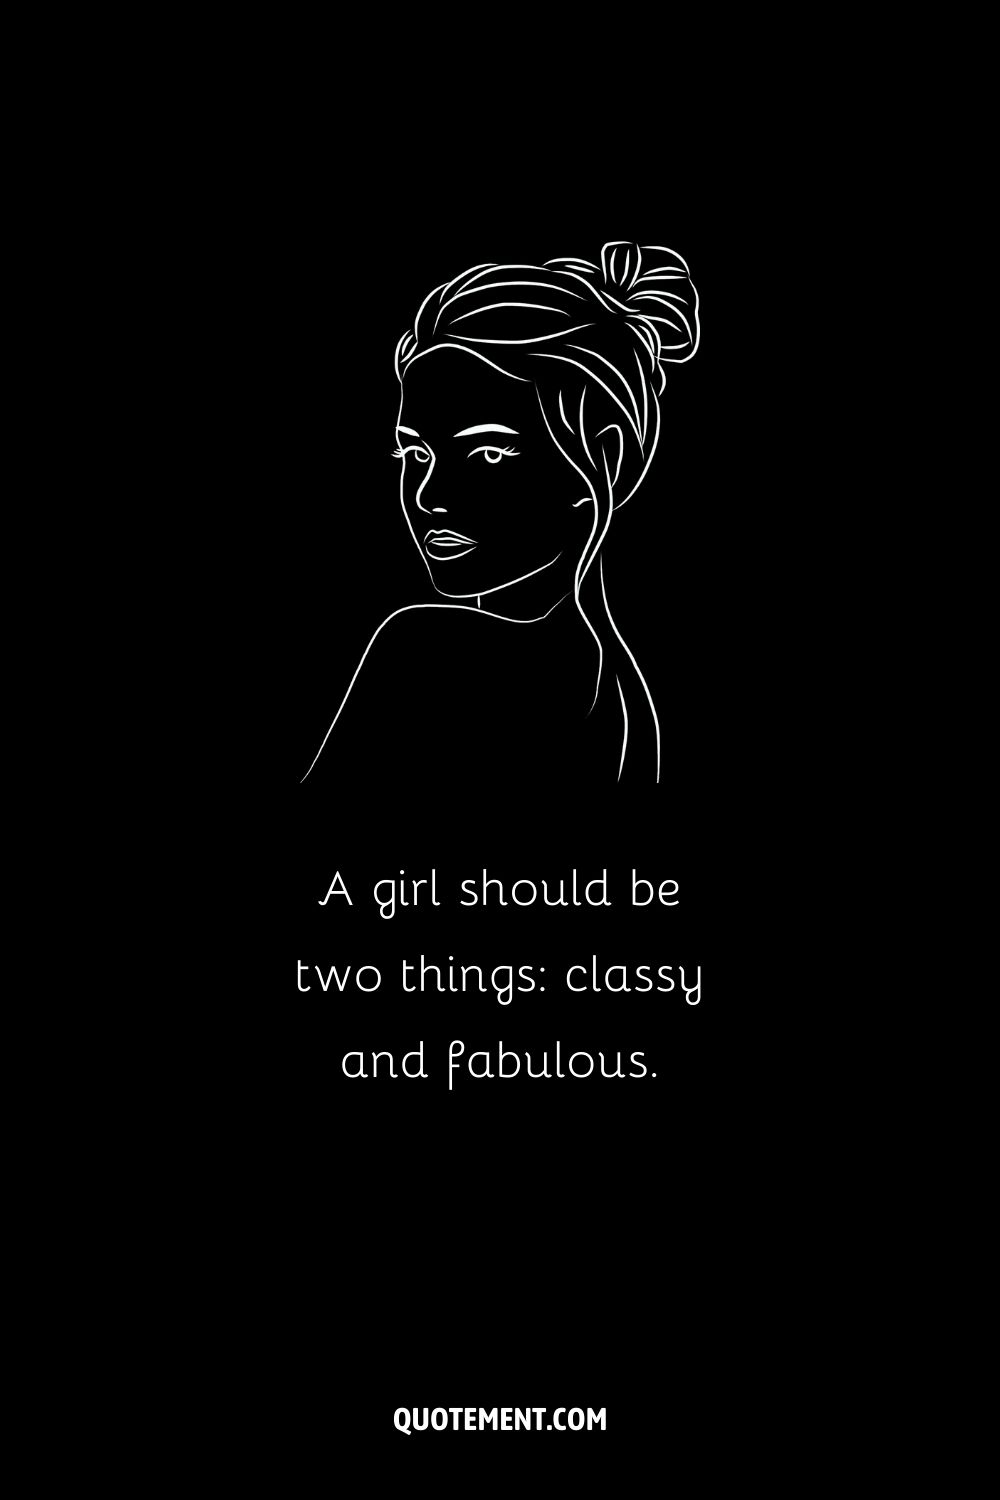 Cute caption idea for a girl and an illustration of a woman in black and white